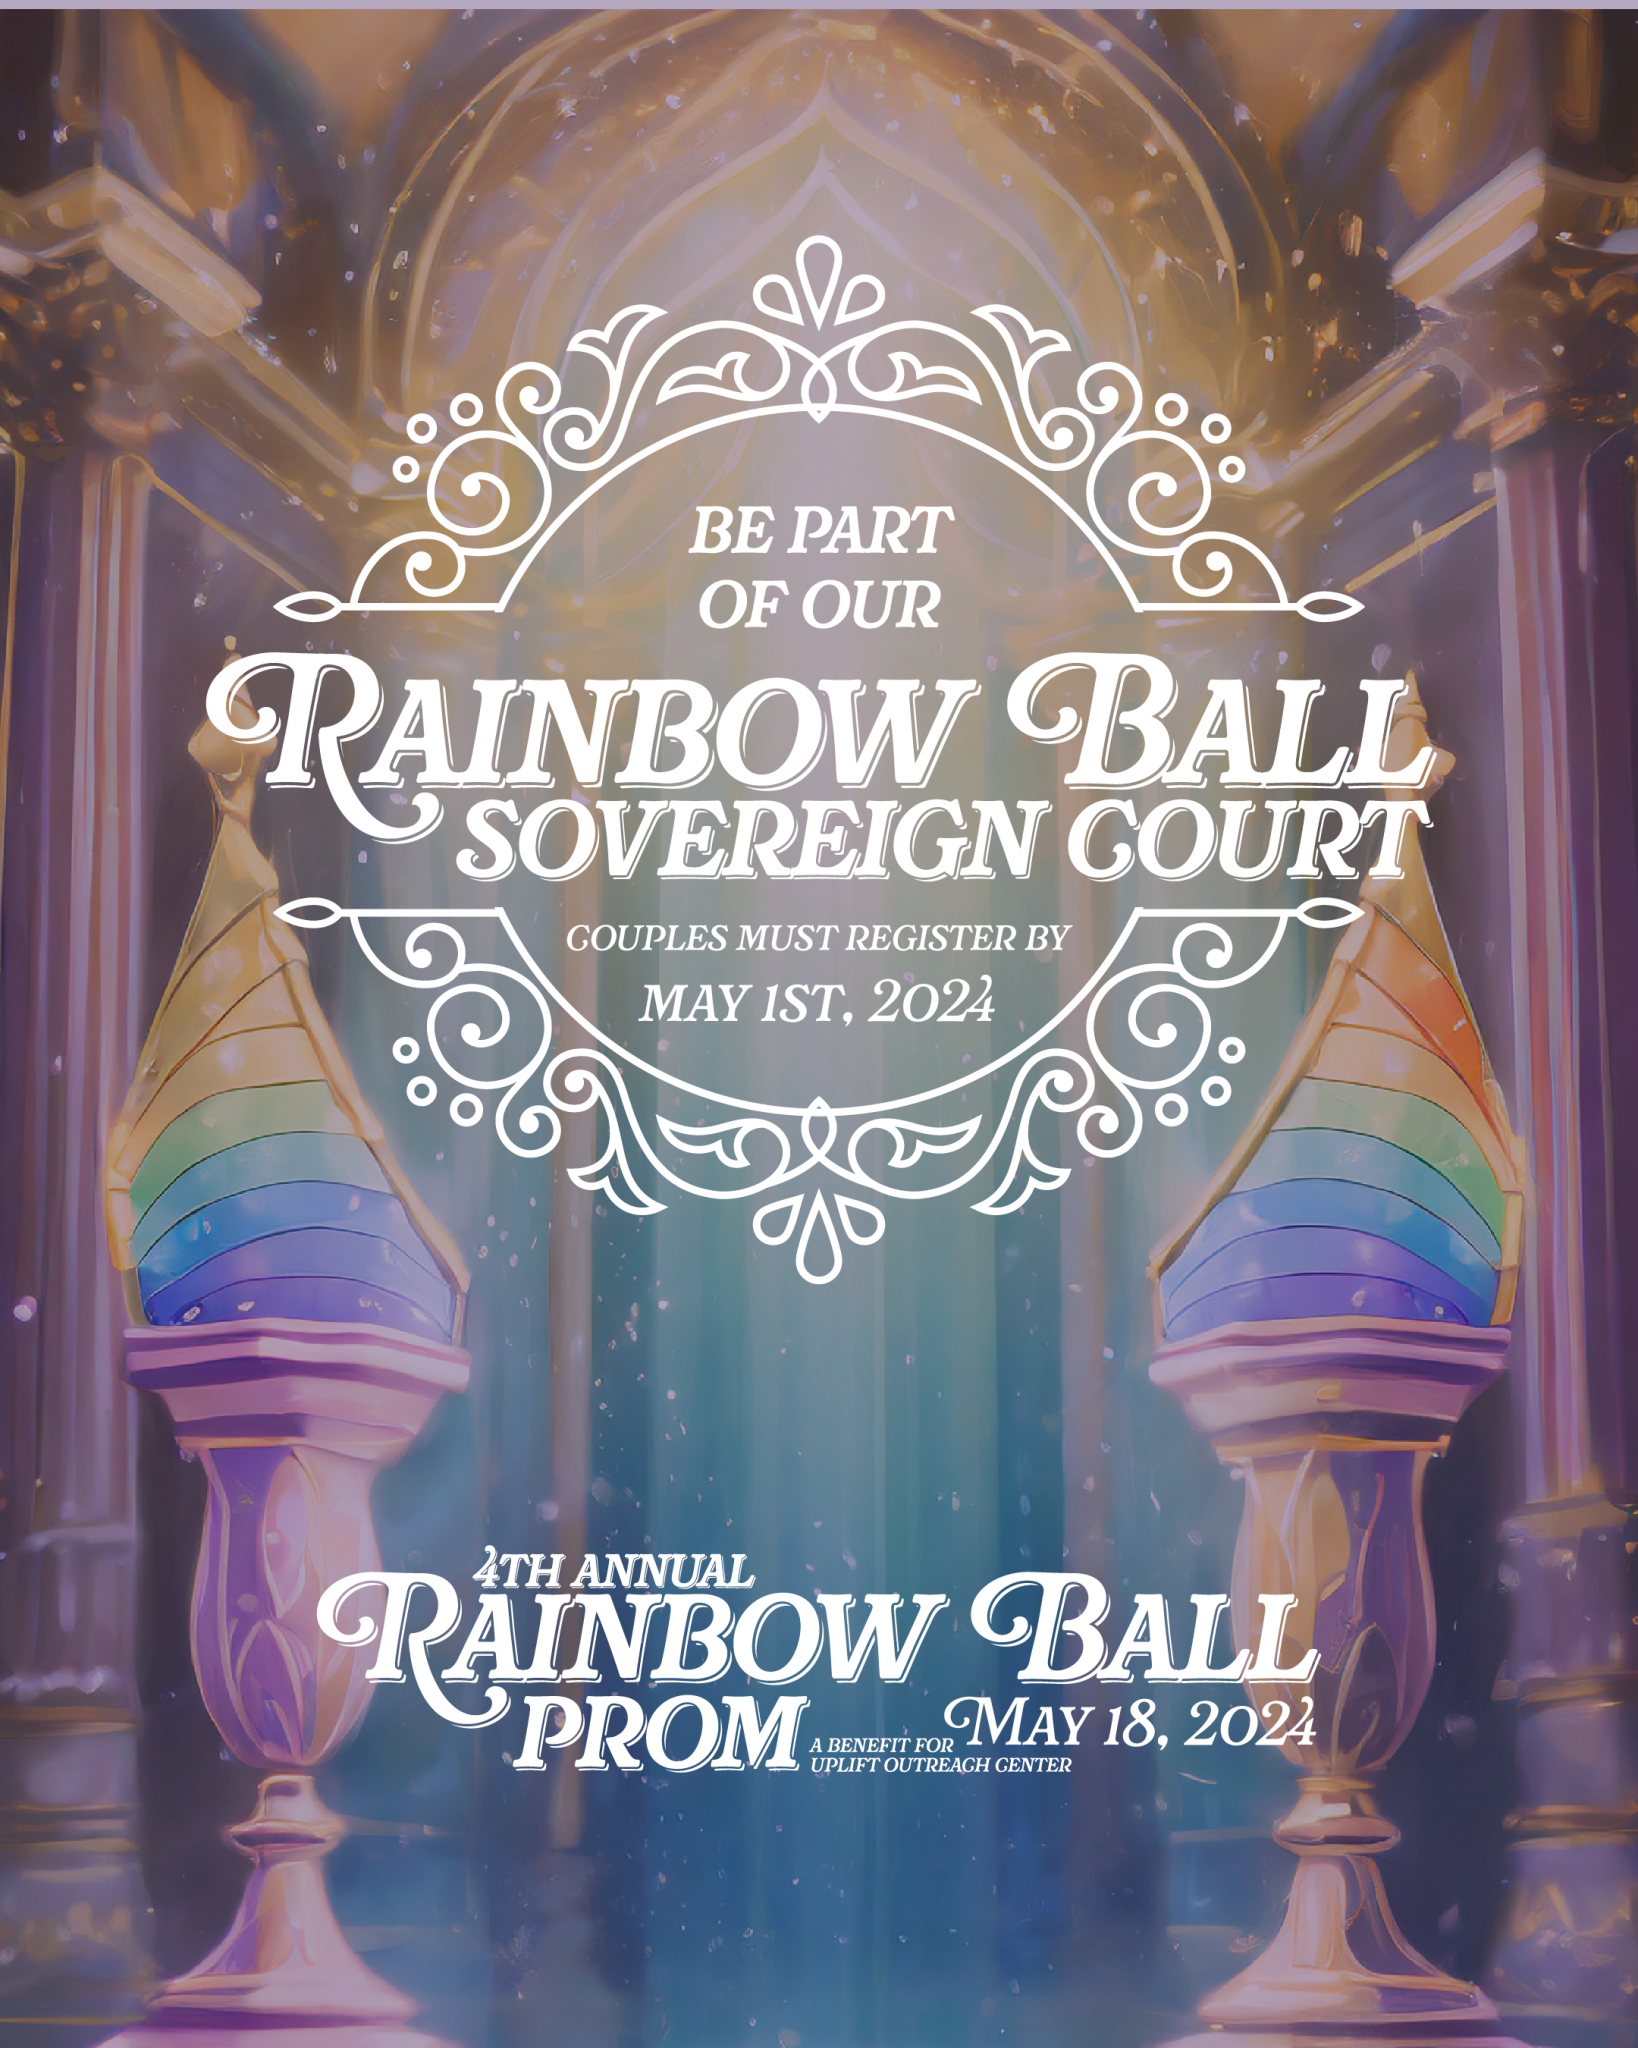 Be part of our Rainbow Ball Sovereign Court